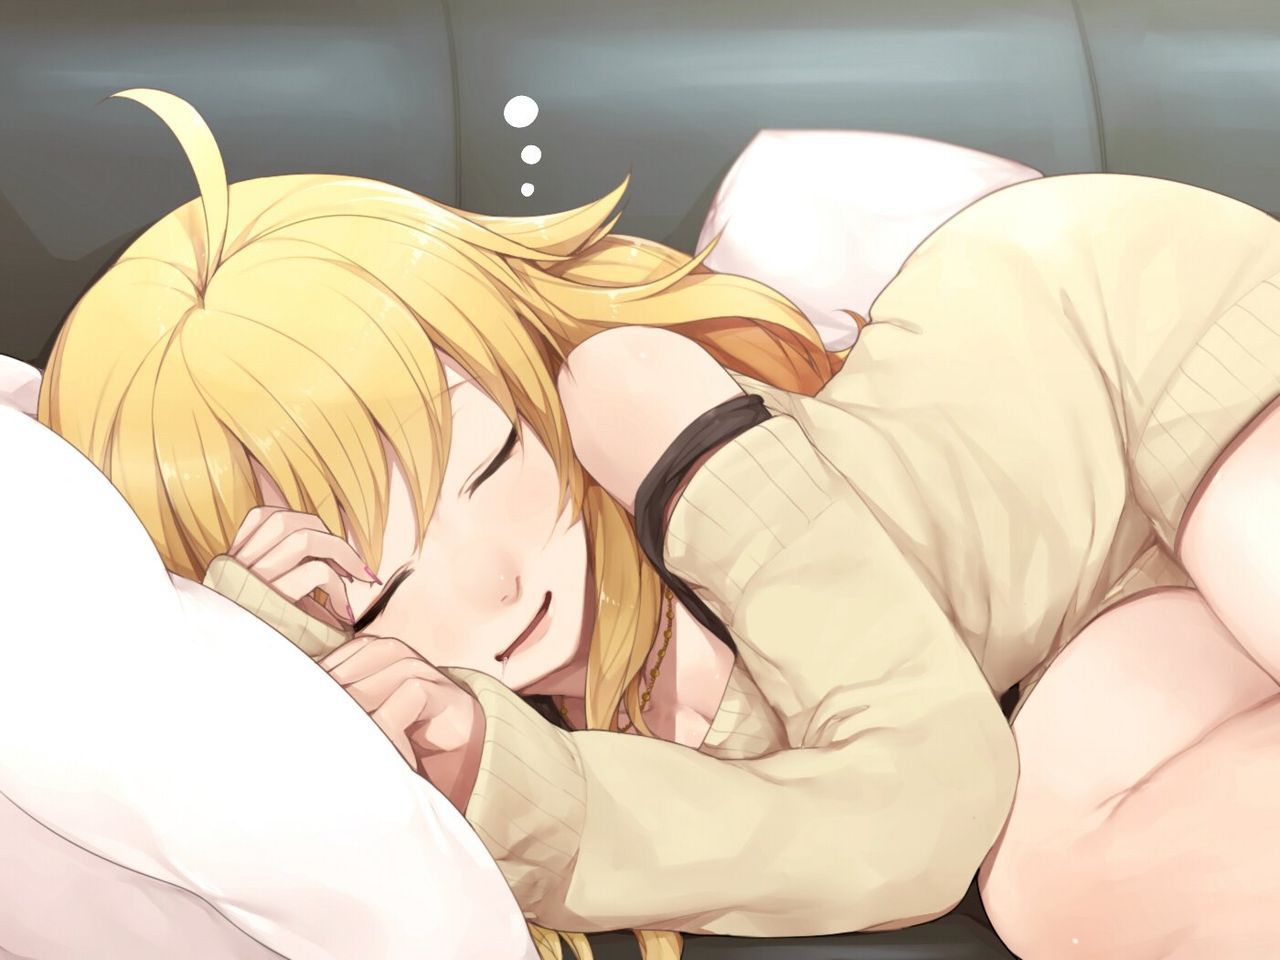 Tonight's Onaneta picture is a sleeping face. 25